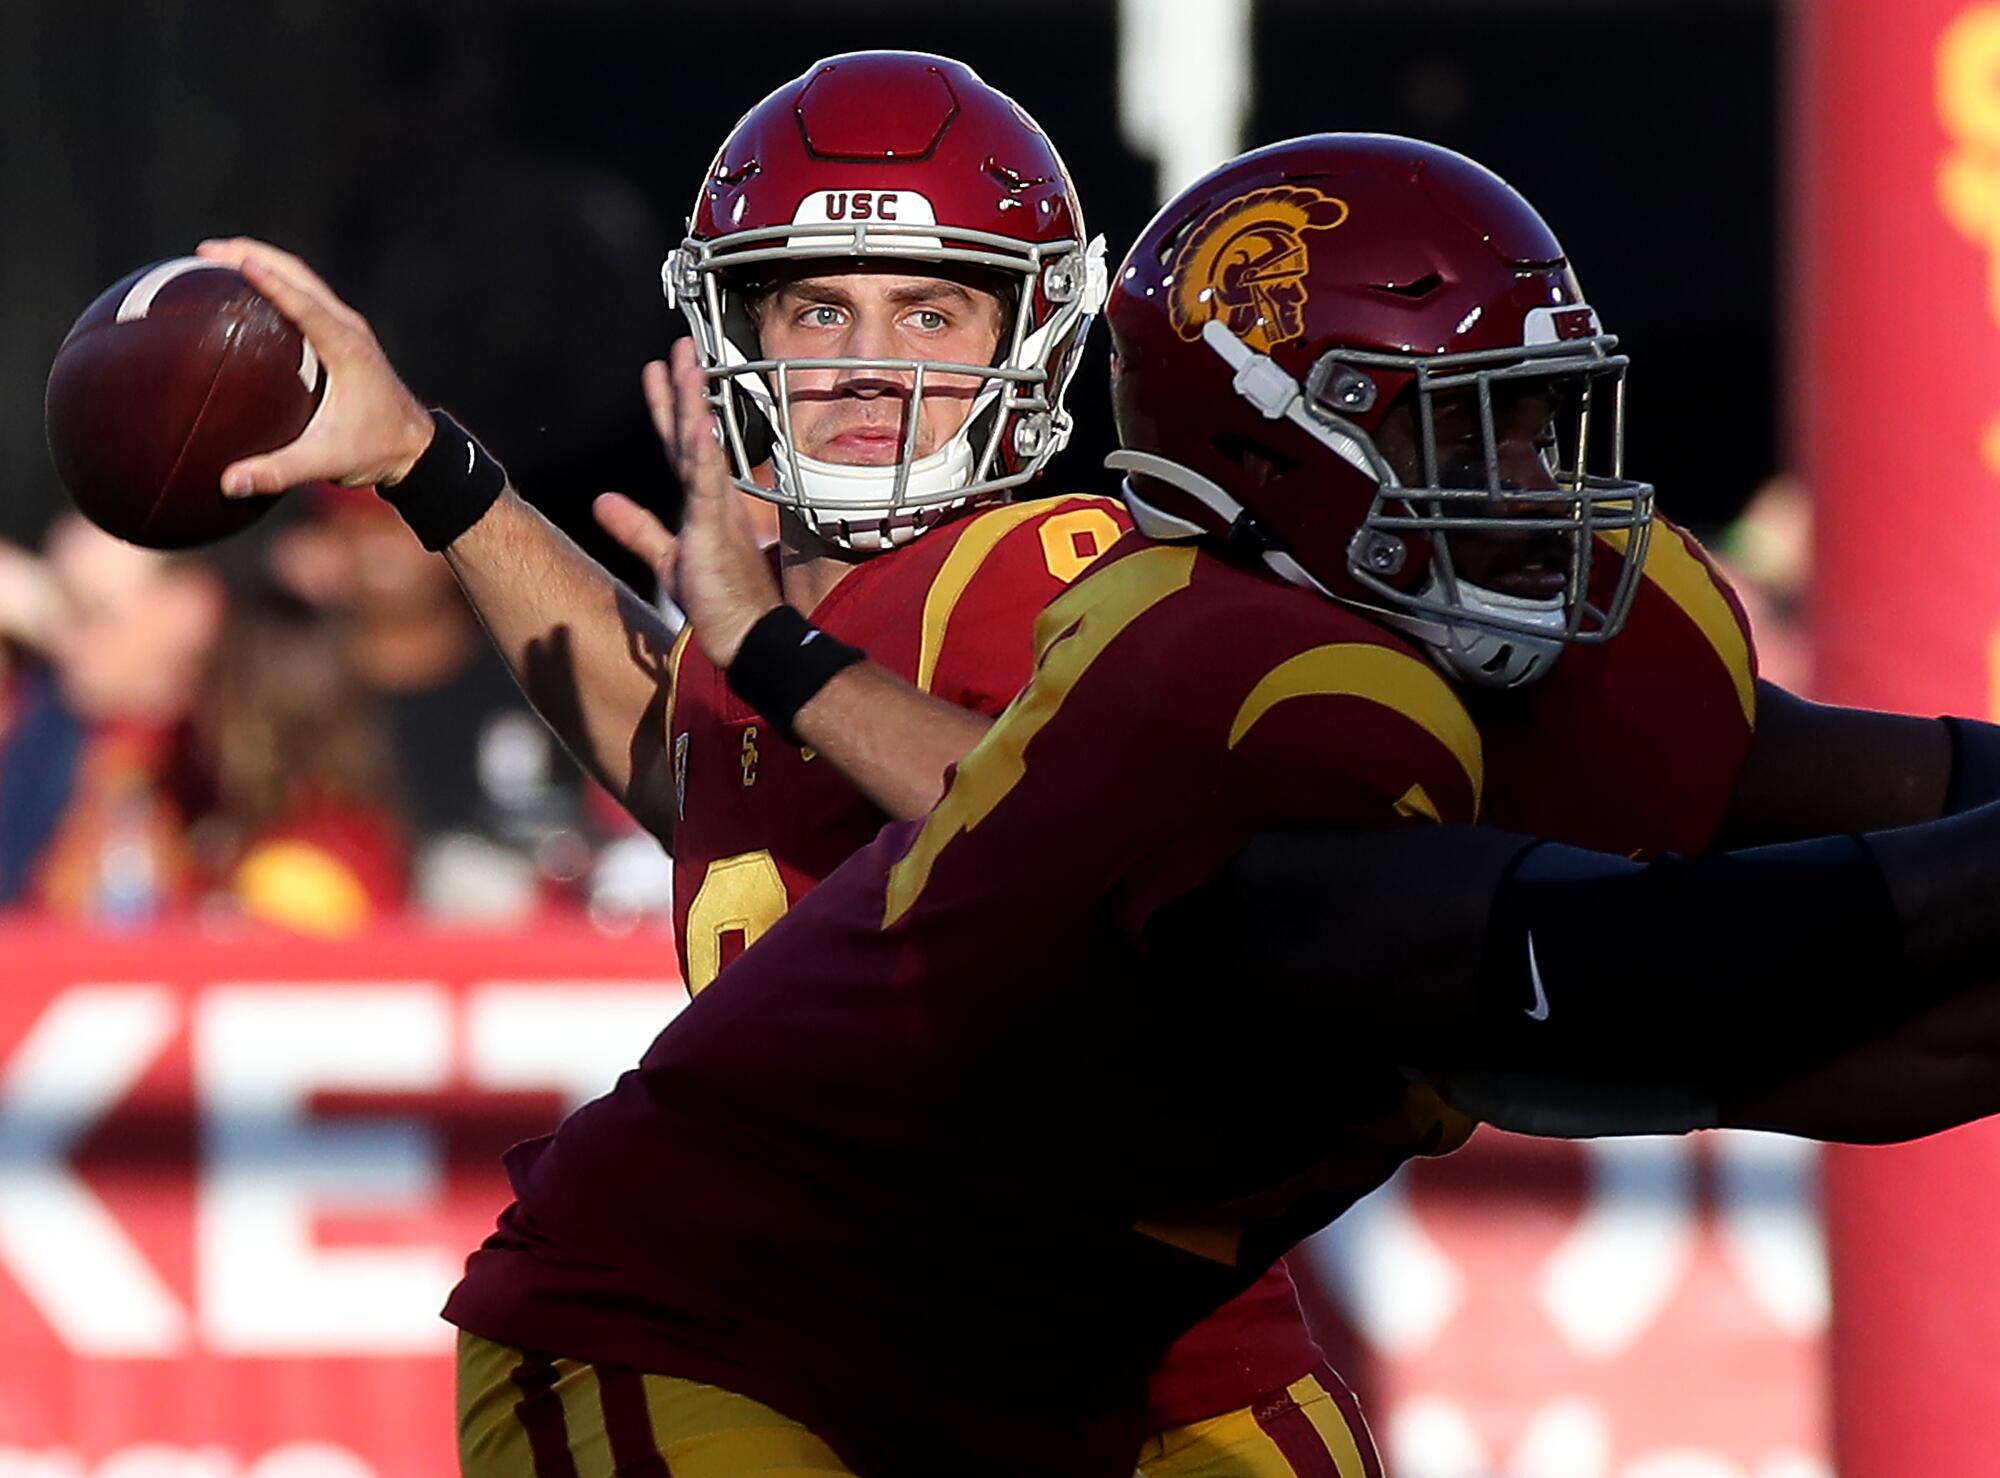 USC quarterback Kedon Slovis looks for a receiver against Utah in the first half.